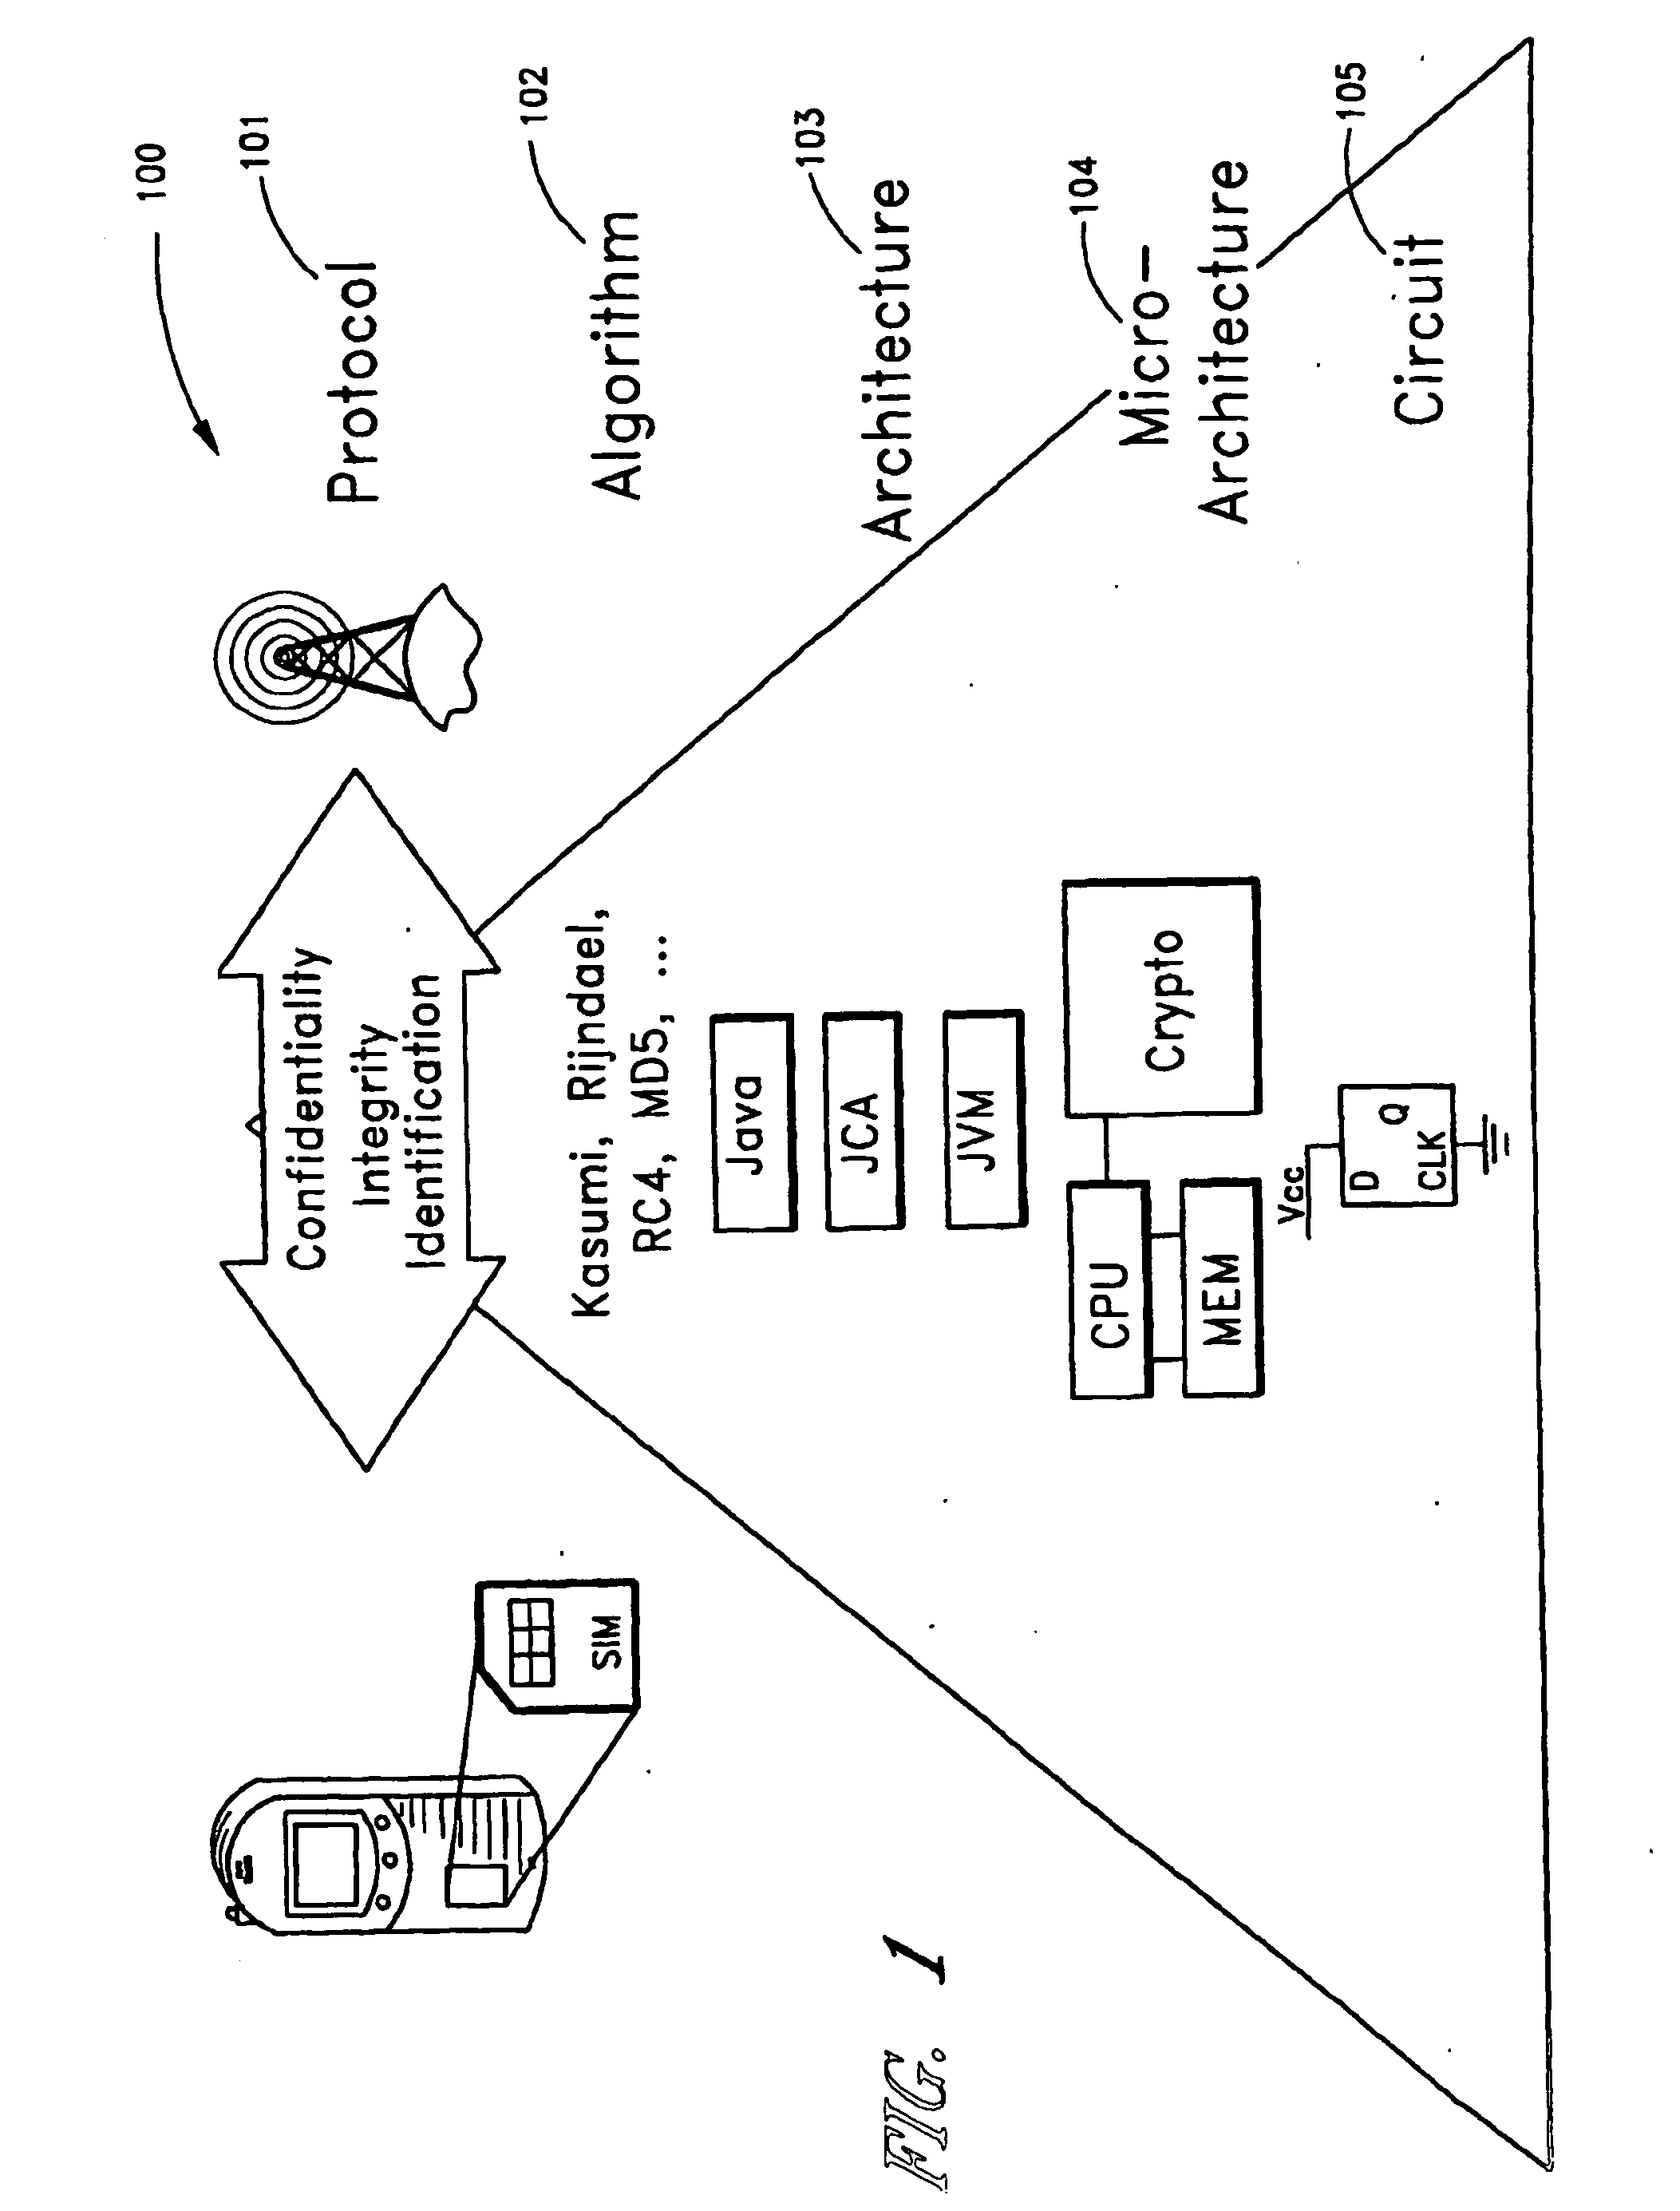 System for biometric signal processing with hardware and software acceleration